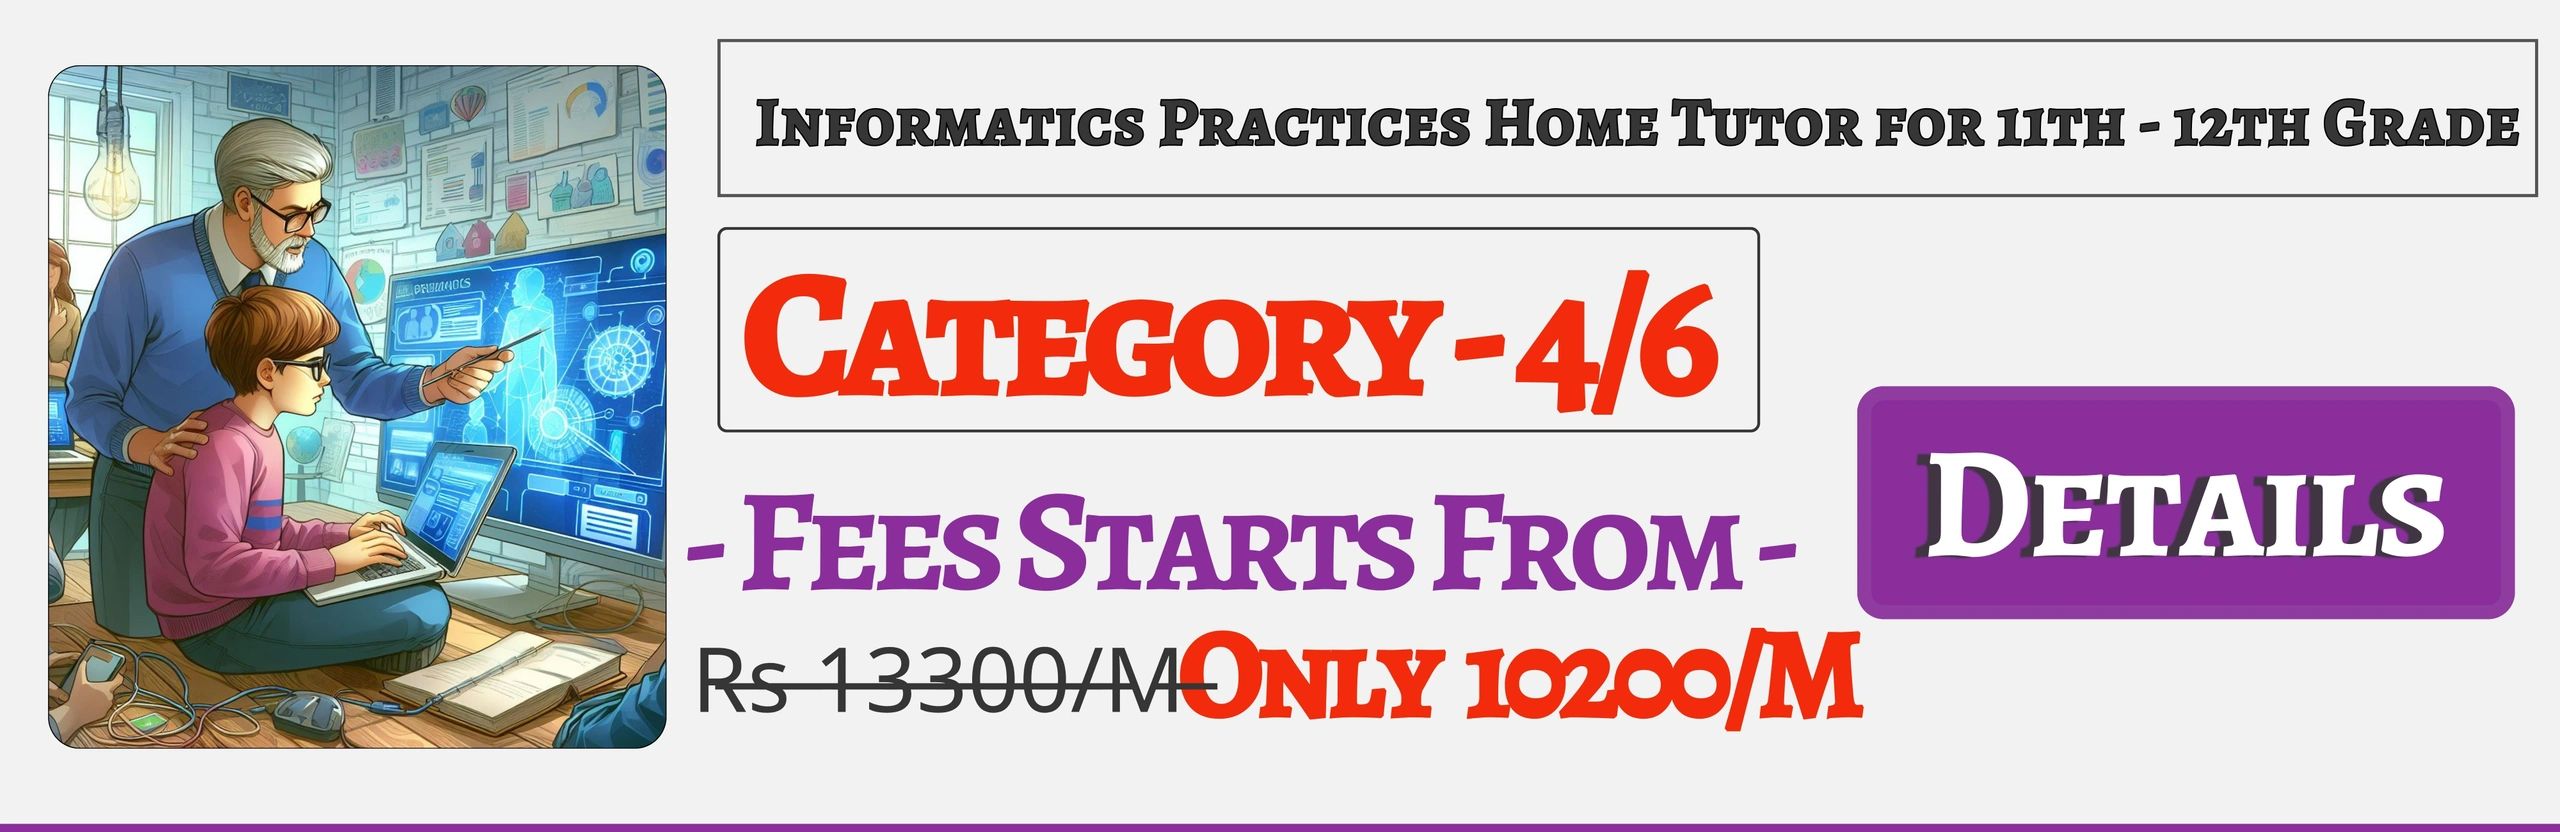 Book Best Nearby Informatics Practices Home Tuition Tutors For 11th & 12th Jaipur ,Fees Only 10200/M